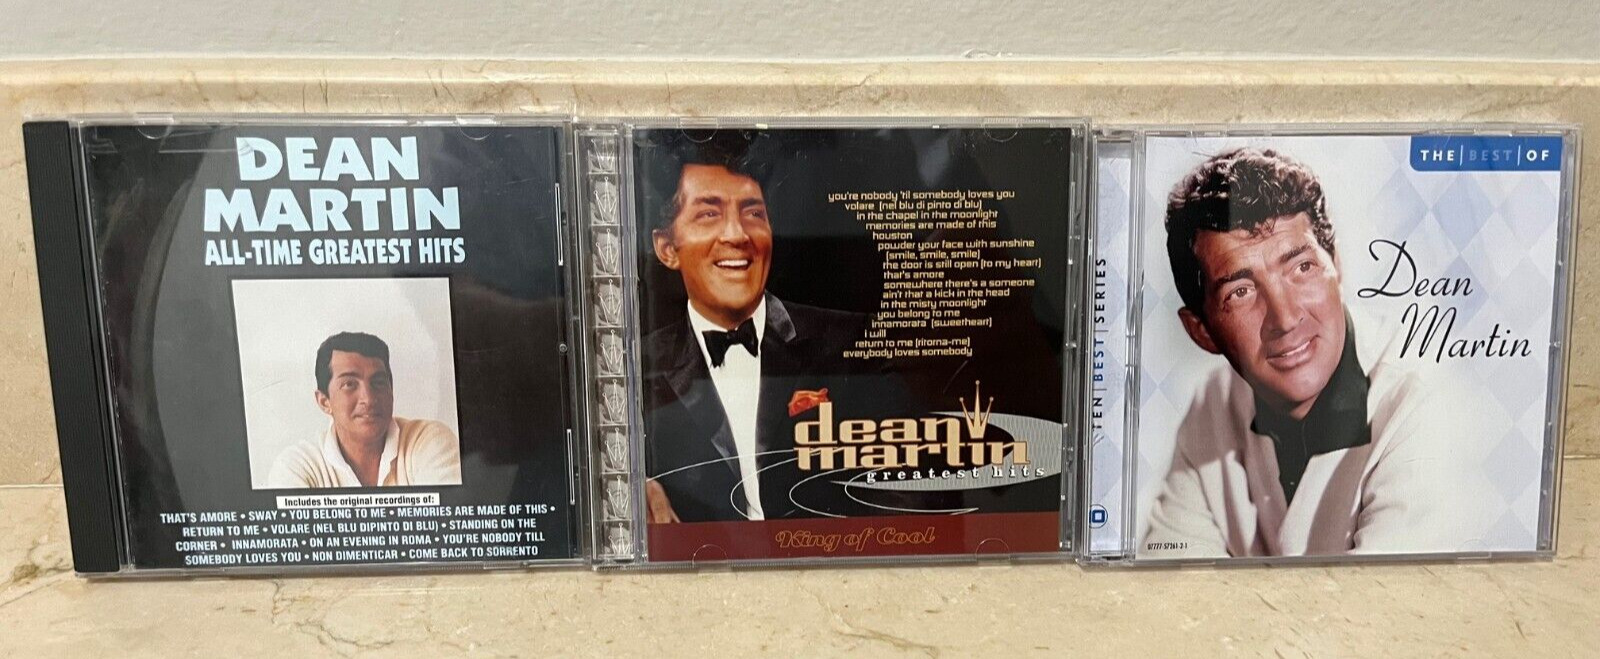 Dean Martin CD Lot Of 3 , The Best Of, Greatest Hits, All-Time Greatest Hits